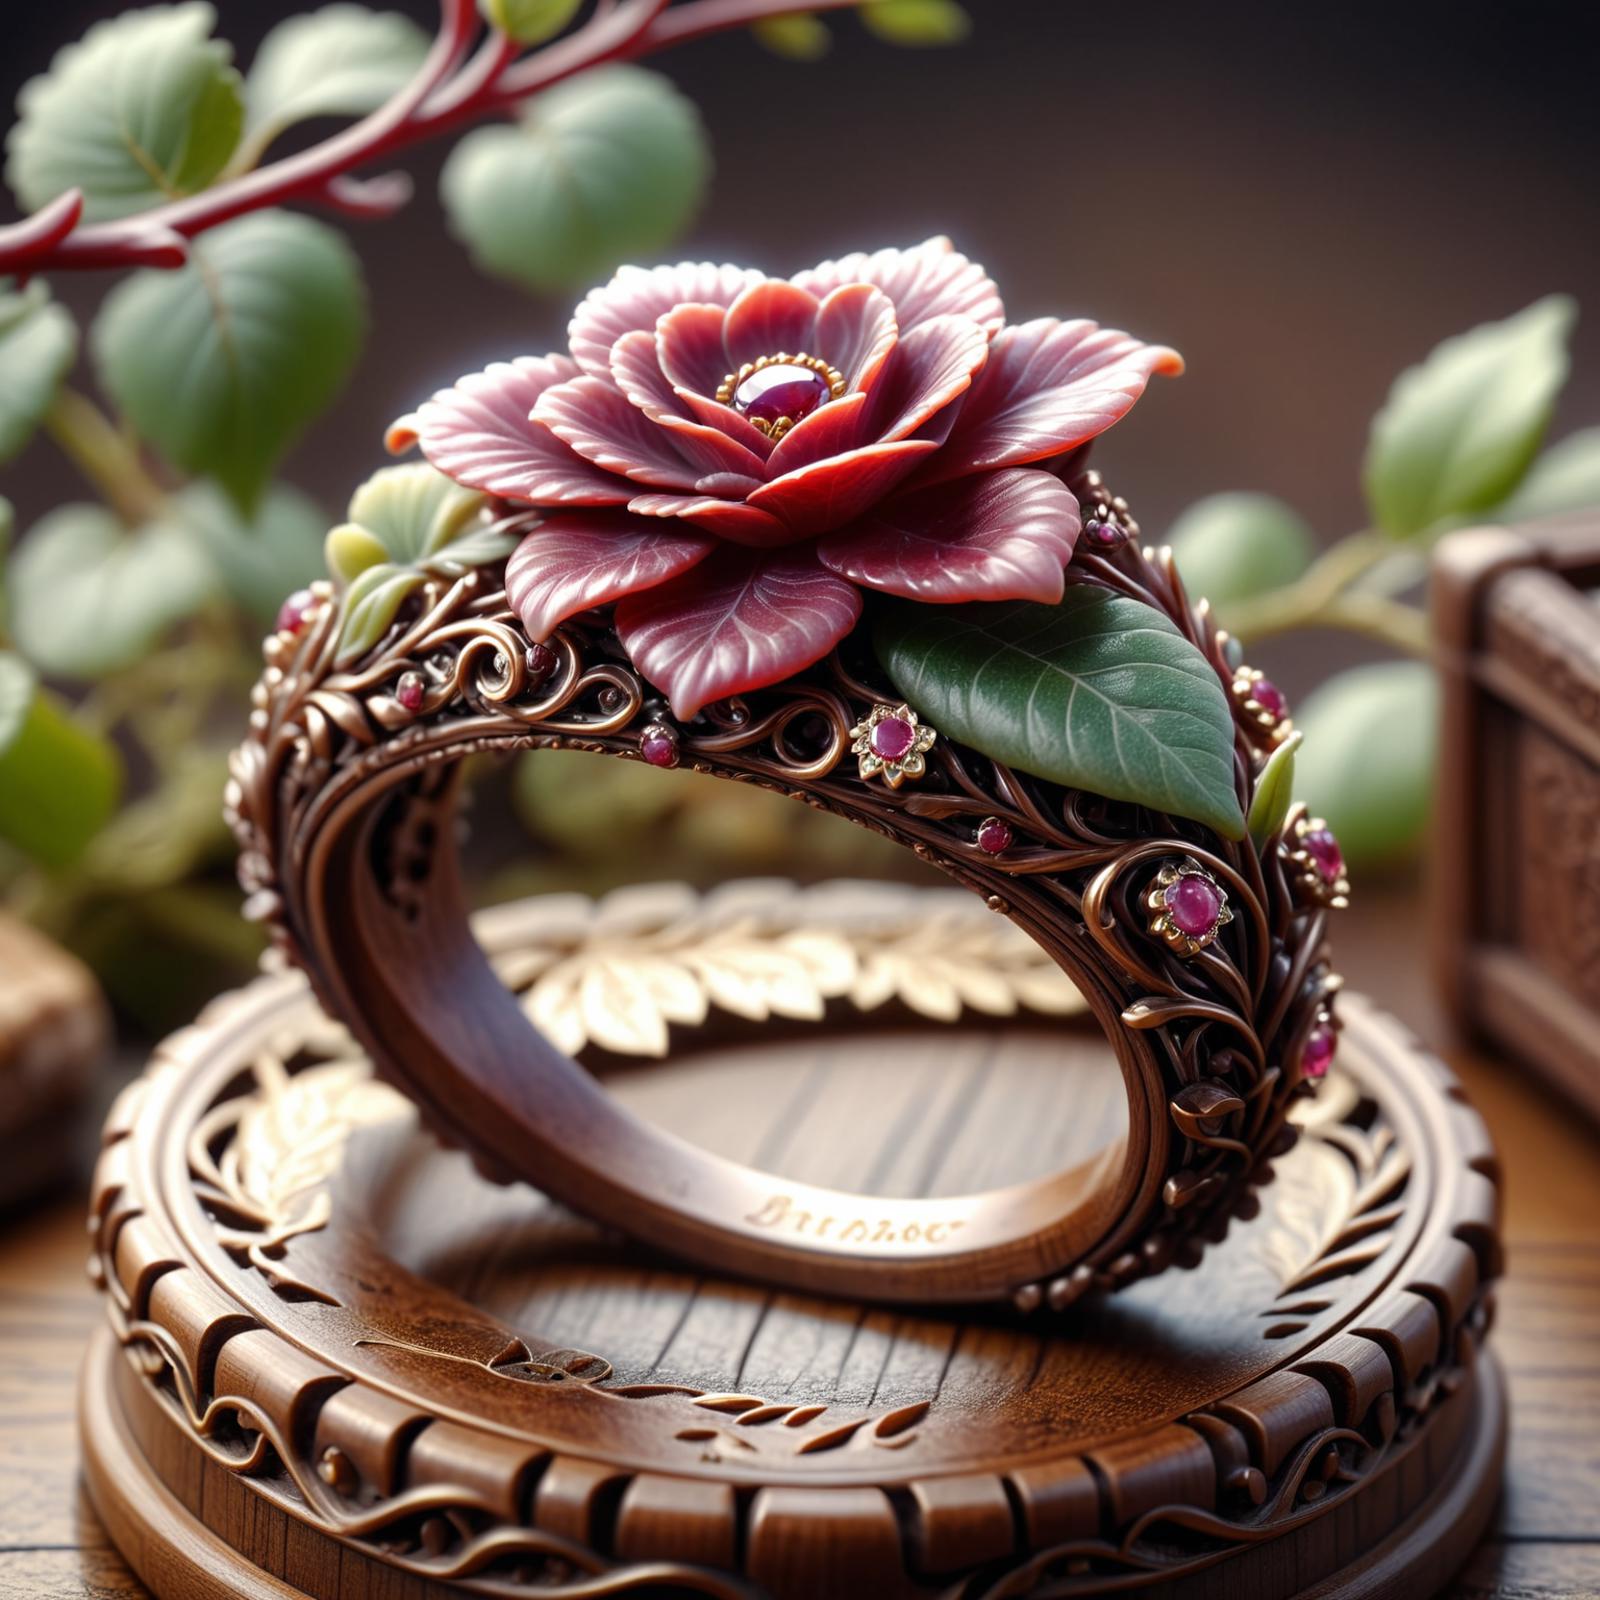 Wooden Ring with a Flower Decoration on a Wooden Table.